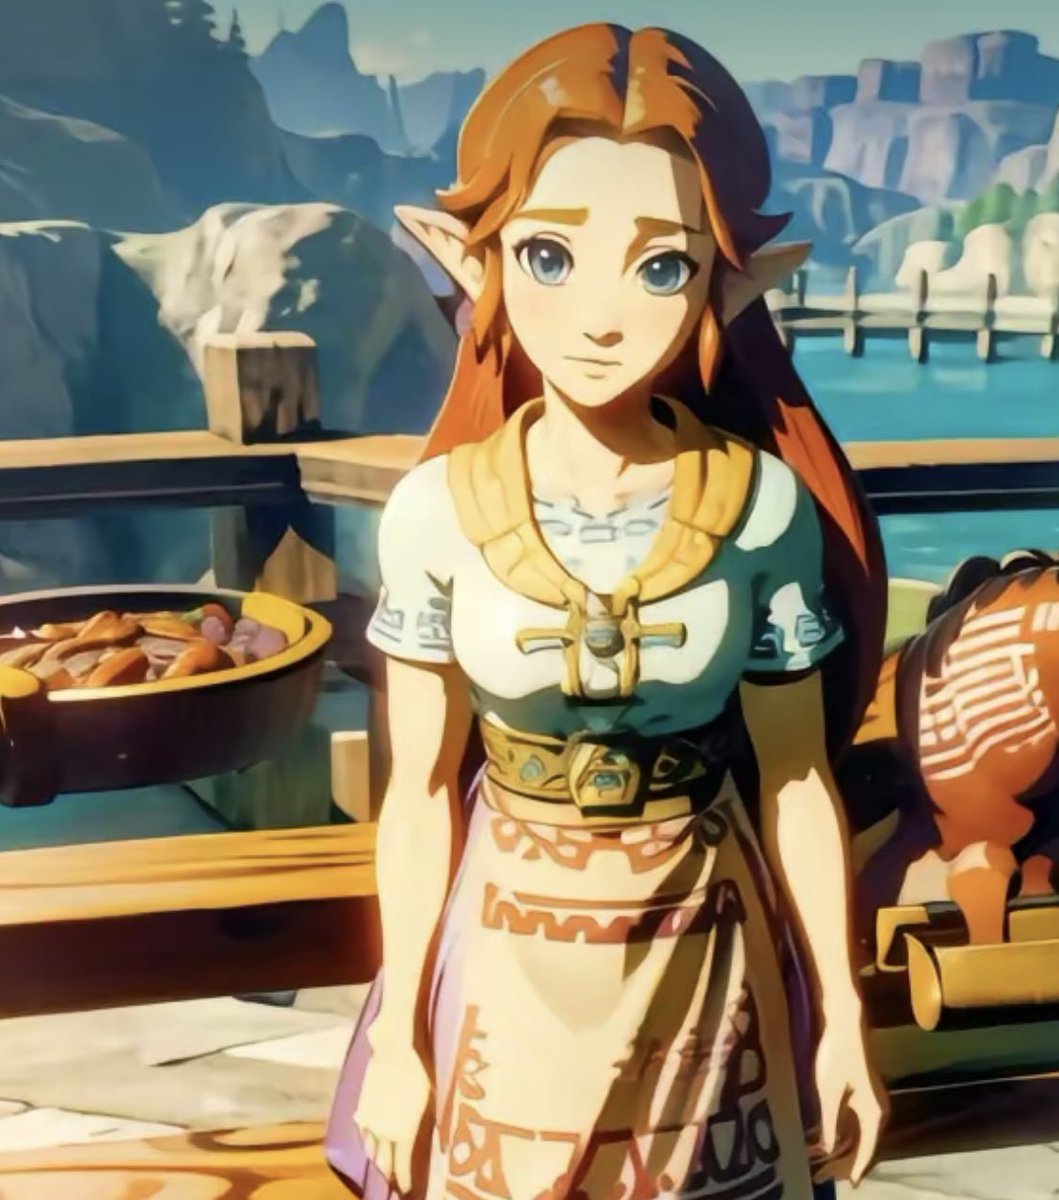 Malon in BOTW art style for good luck